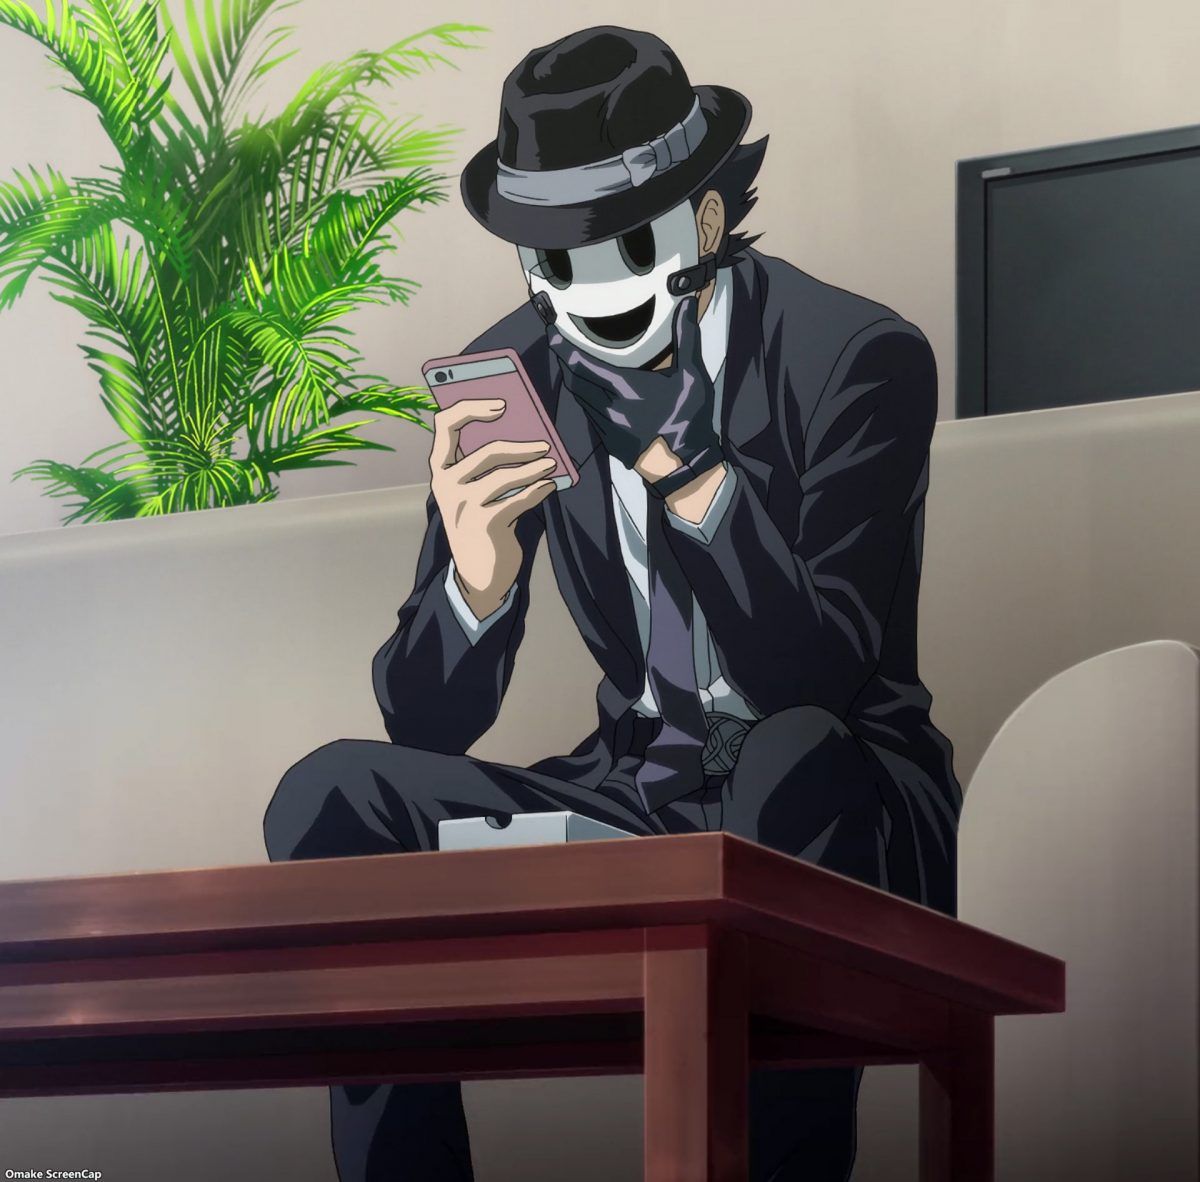 High Rise Invasion Episode 4 Sniper Mask Looks At Kuon's Phone